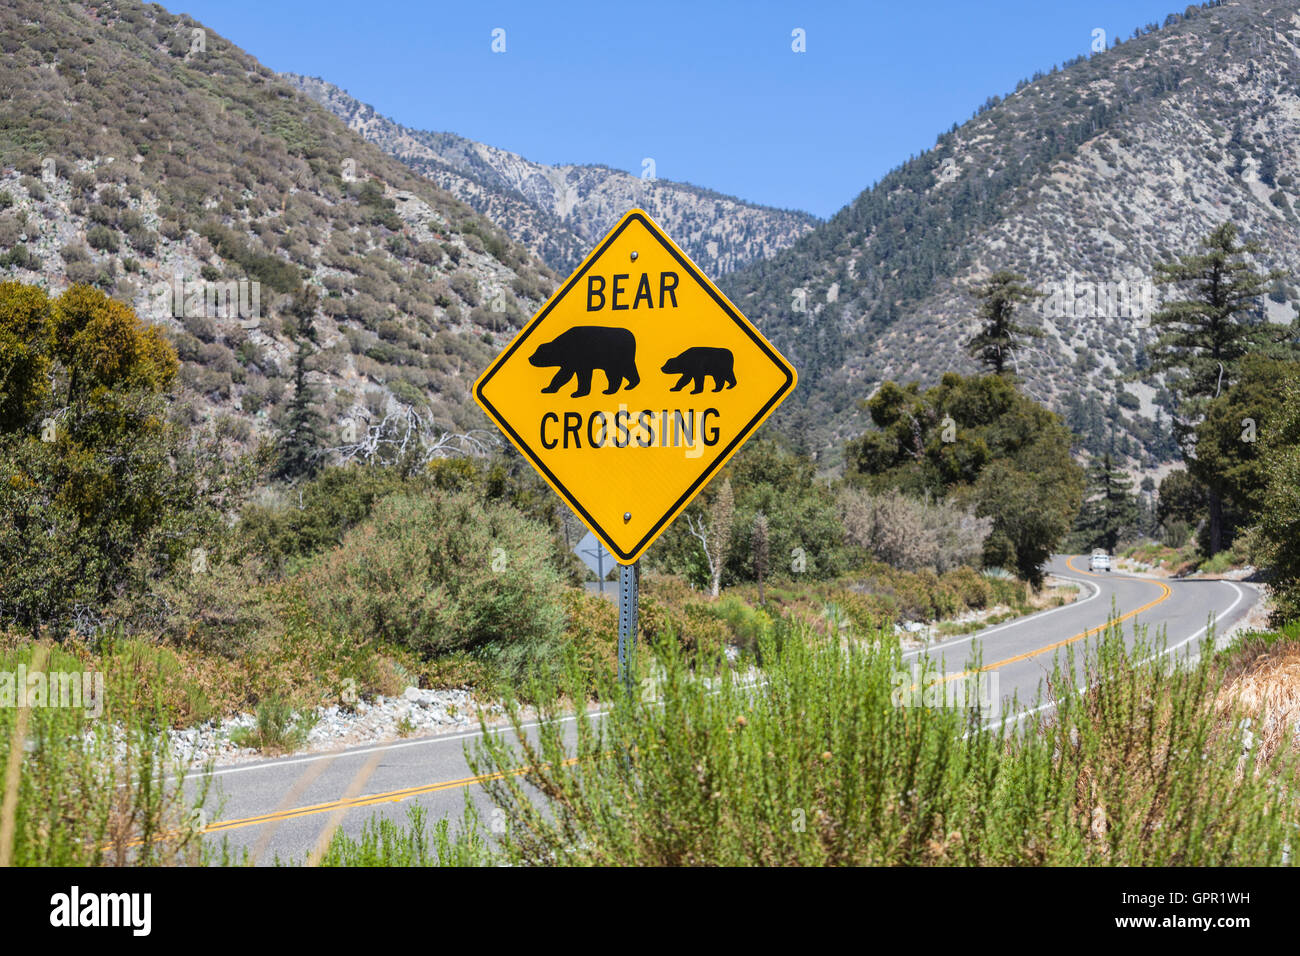 Bear crossing caution highway sign on rural mountain road. Stock Photo